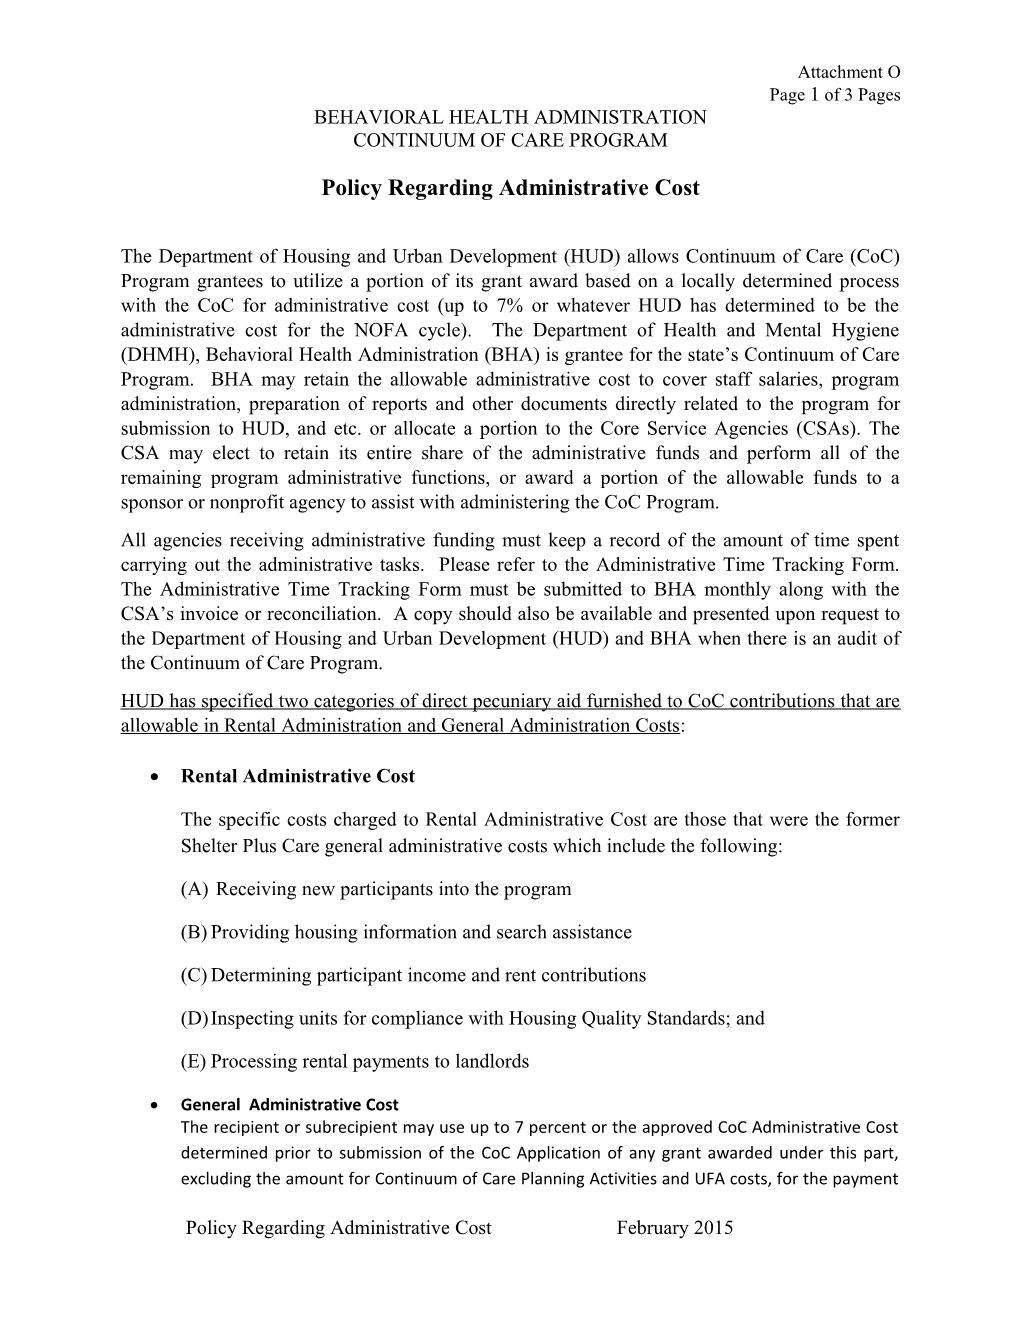 Policy Regarding Administrative Cost